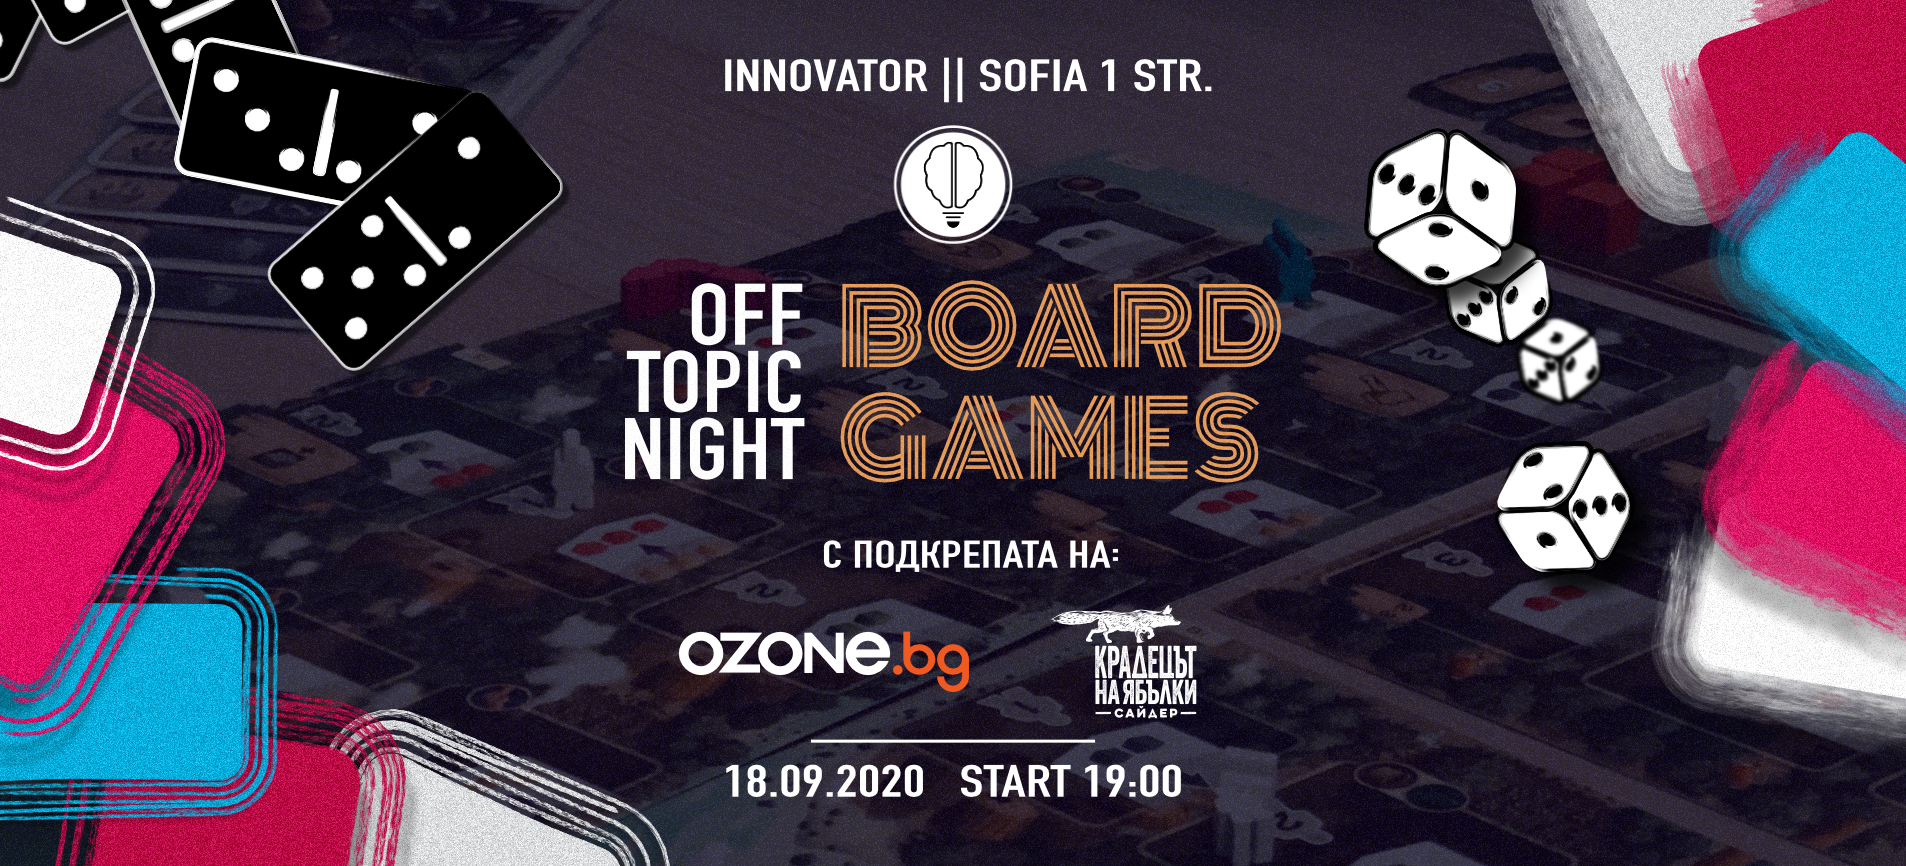 OFF Topic | Board Games Night 13 | Innovator Coworking Space